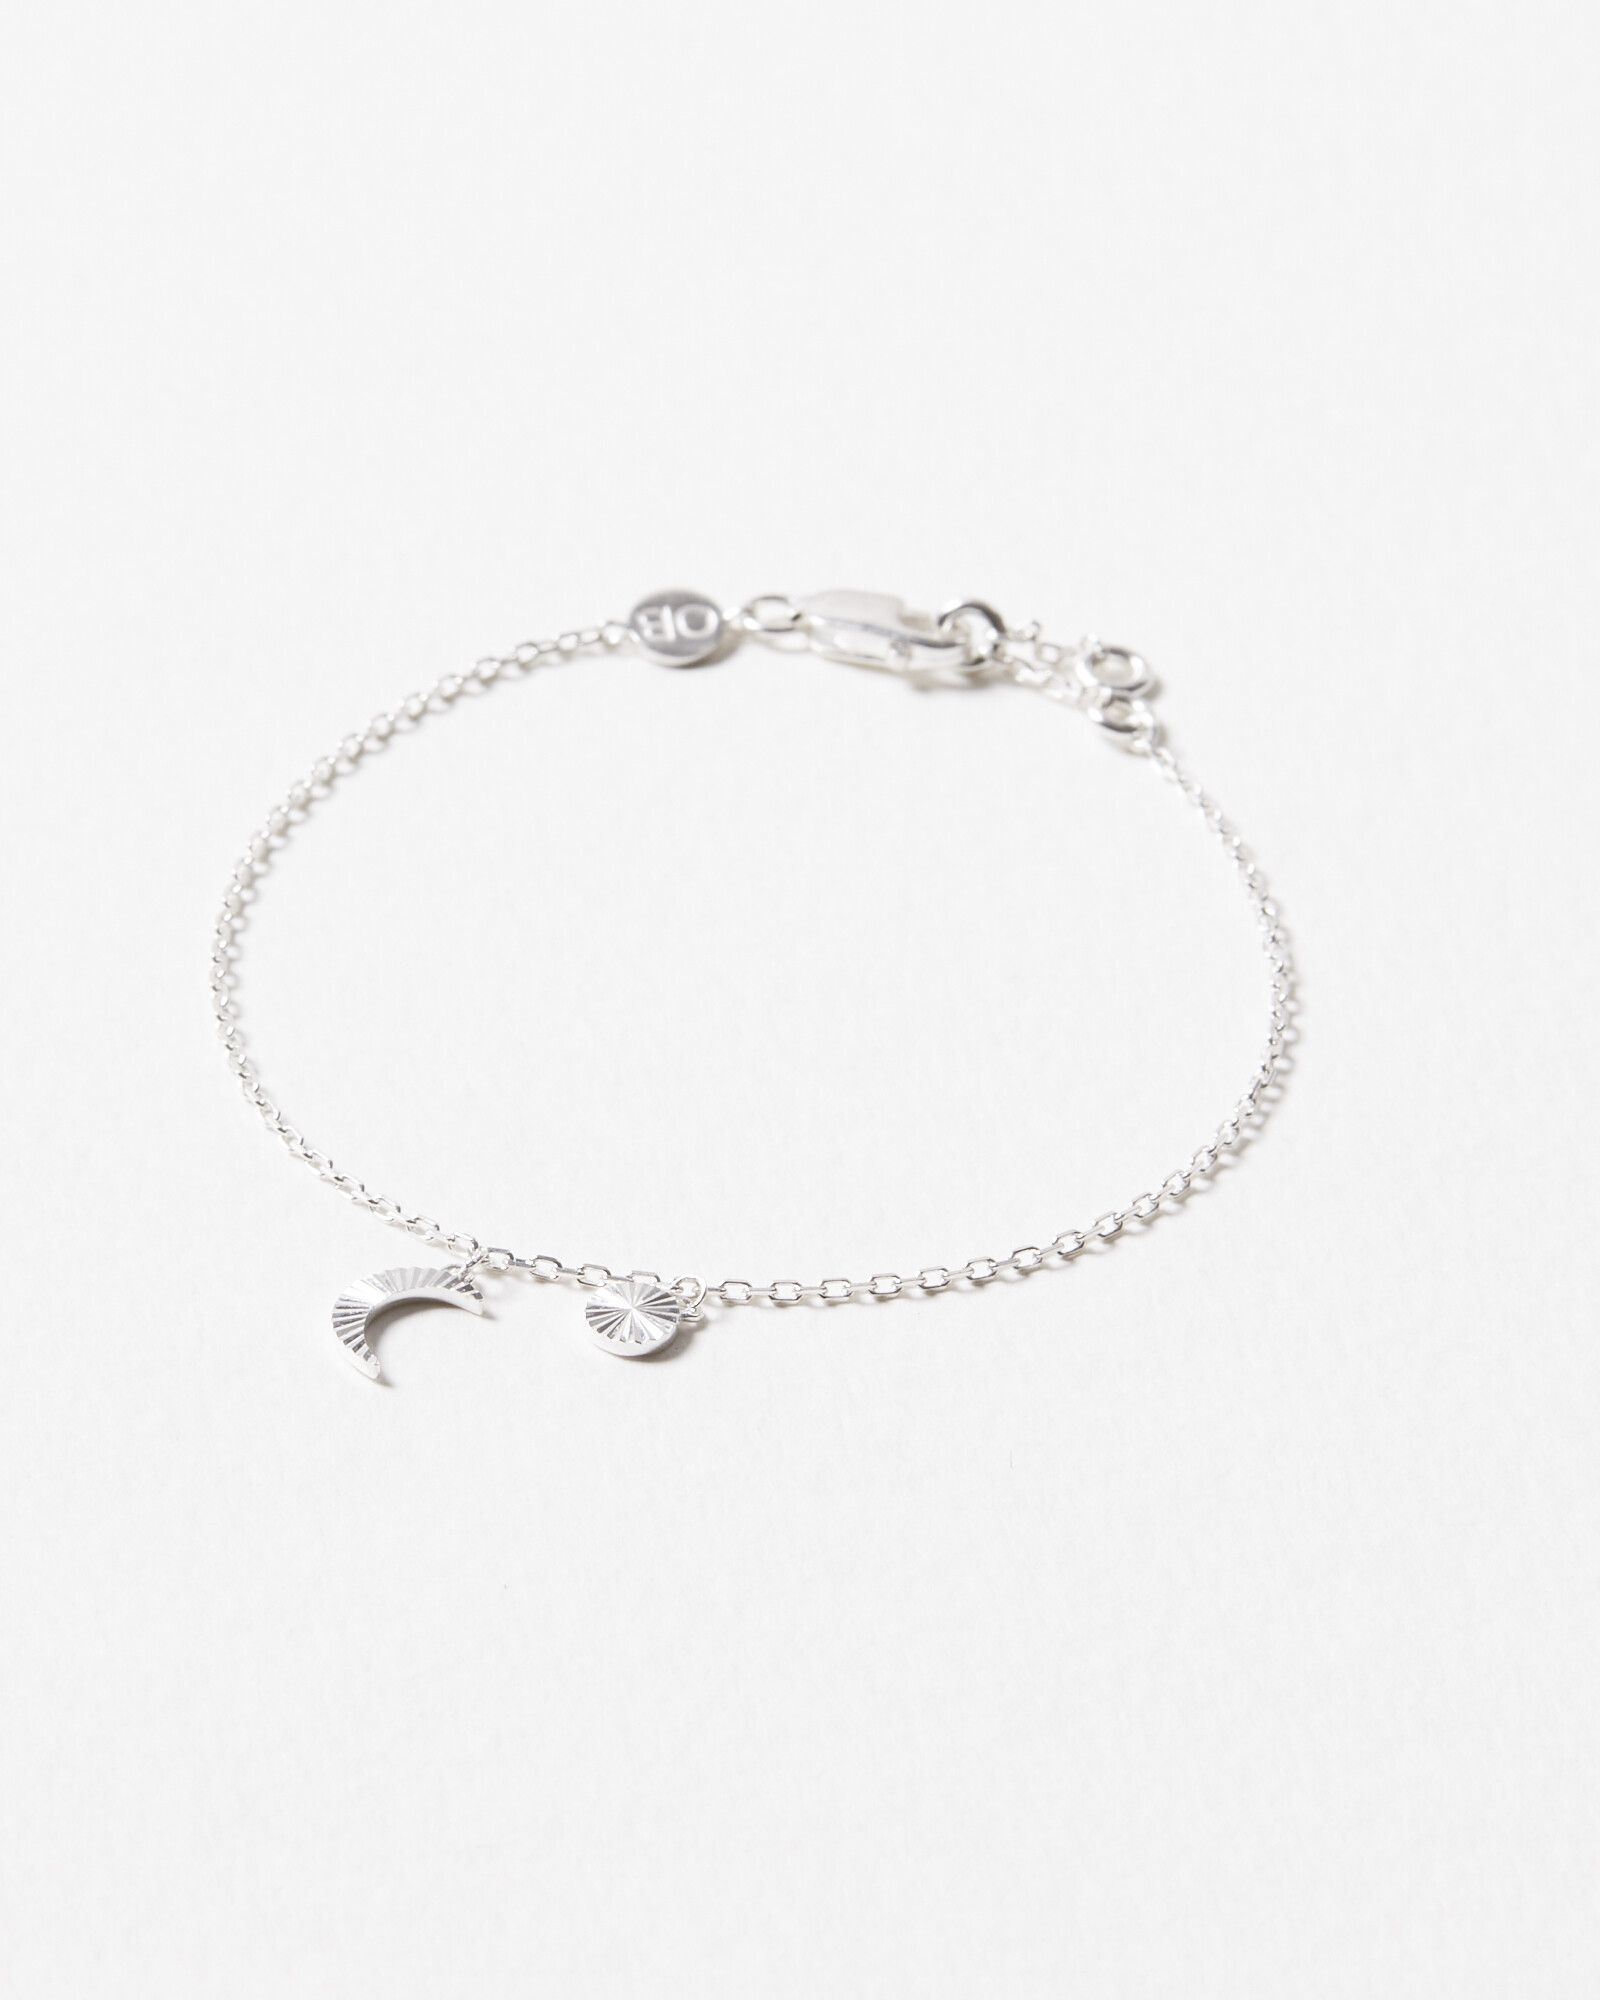 Bangle Bracelet Gift for Women | Elegant and Thoughtful Silver Bangles for  Her – NEMICHAND JEWELS